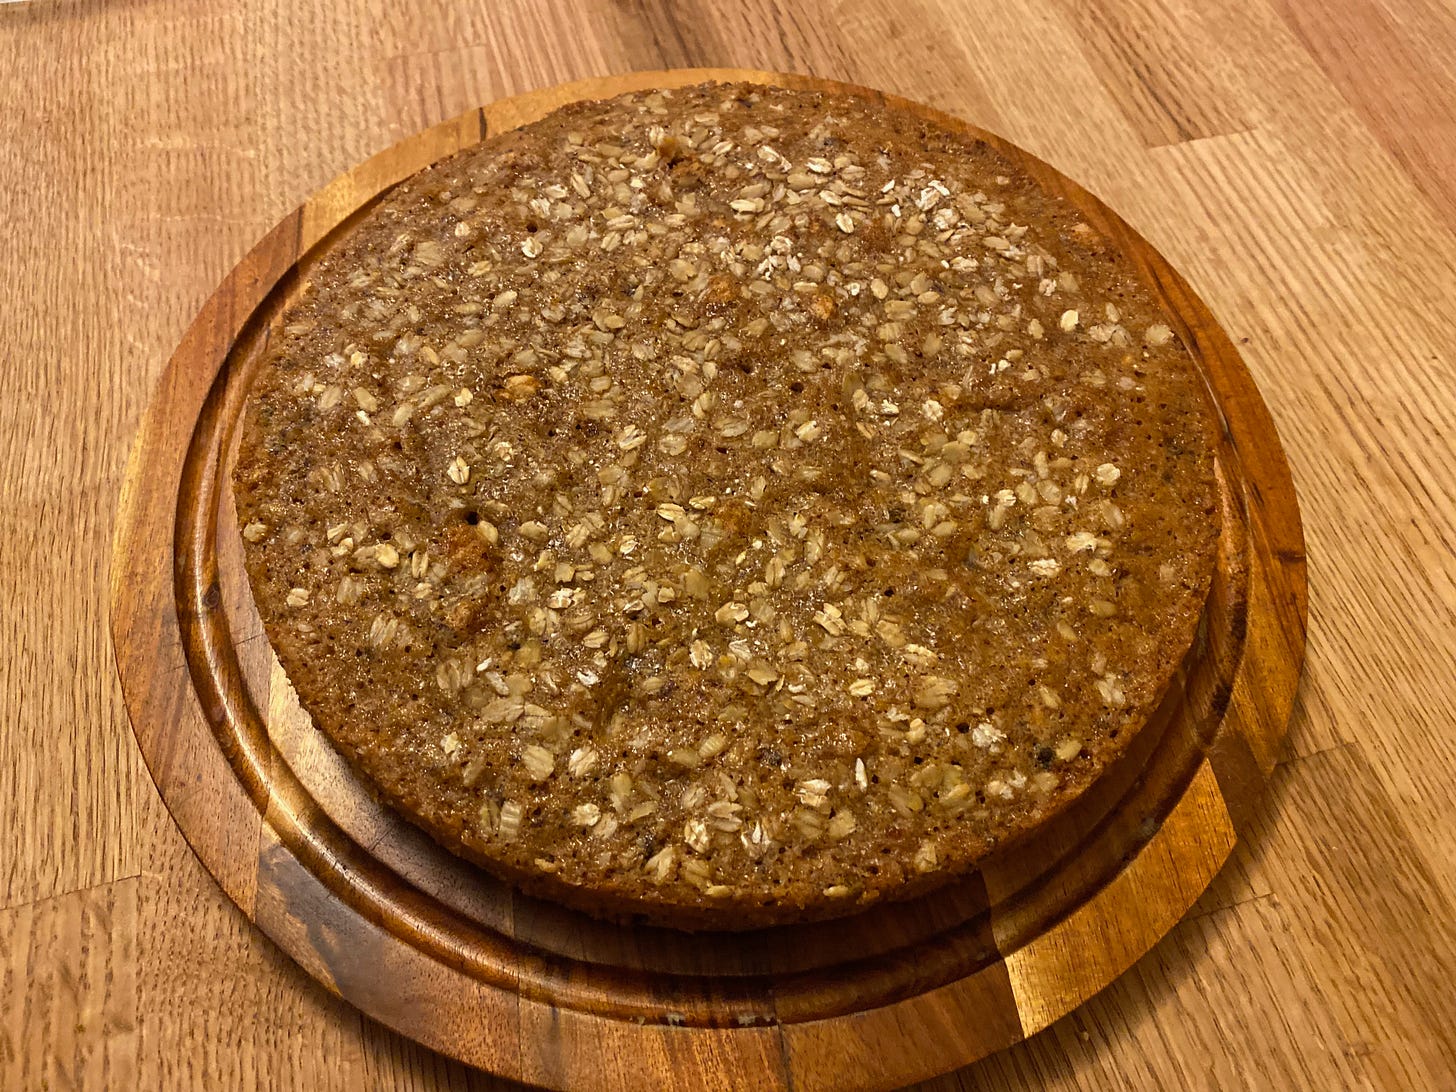 A round cake topped with oats and coarse sugar sits on a wooden plate on my kitchen counter.